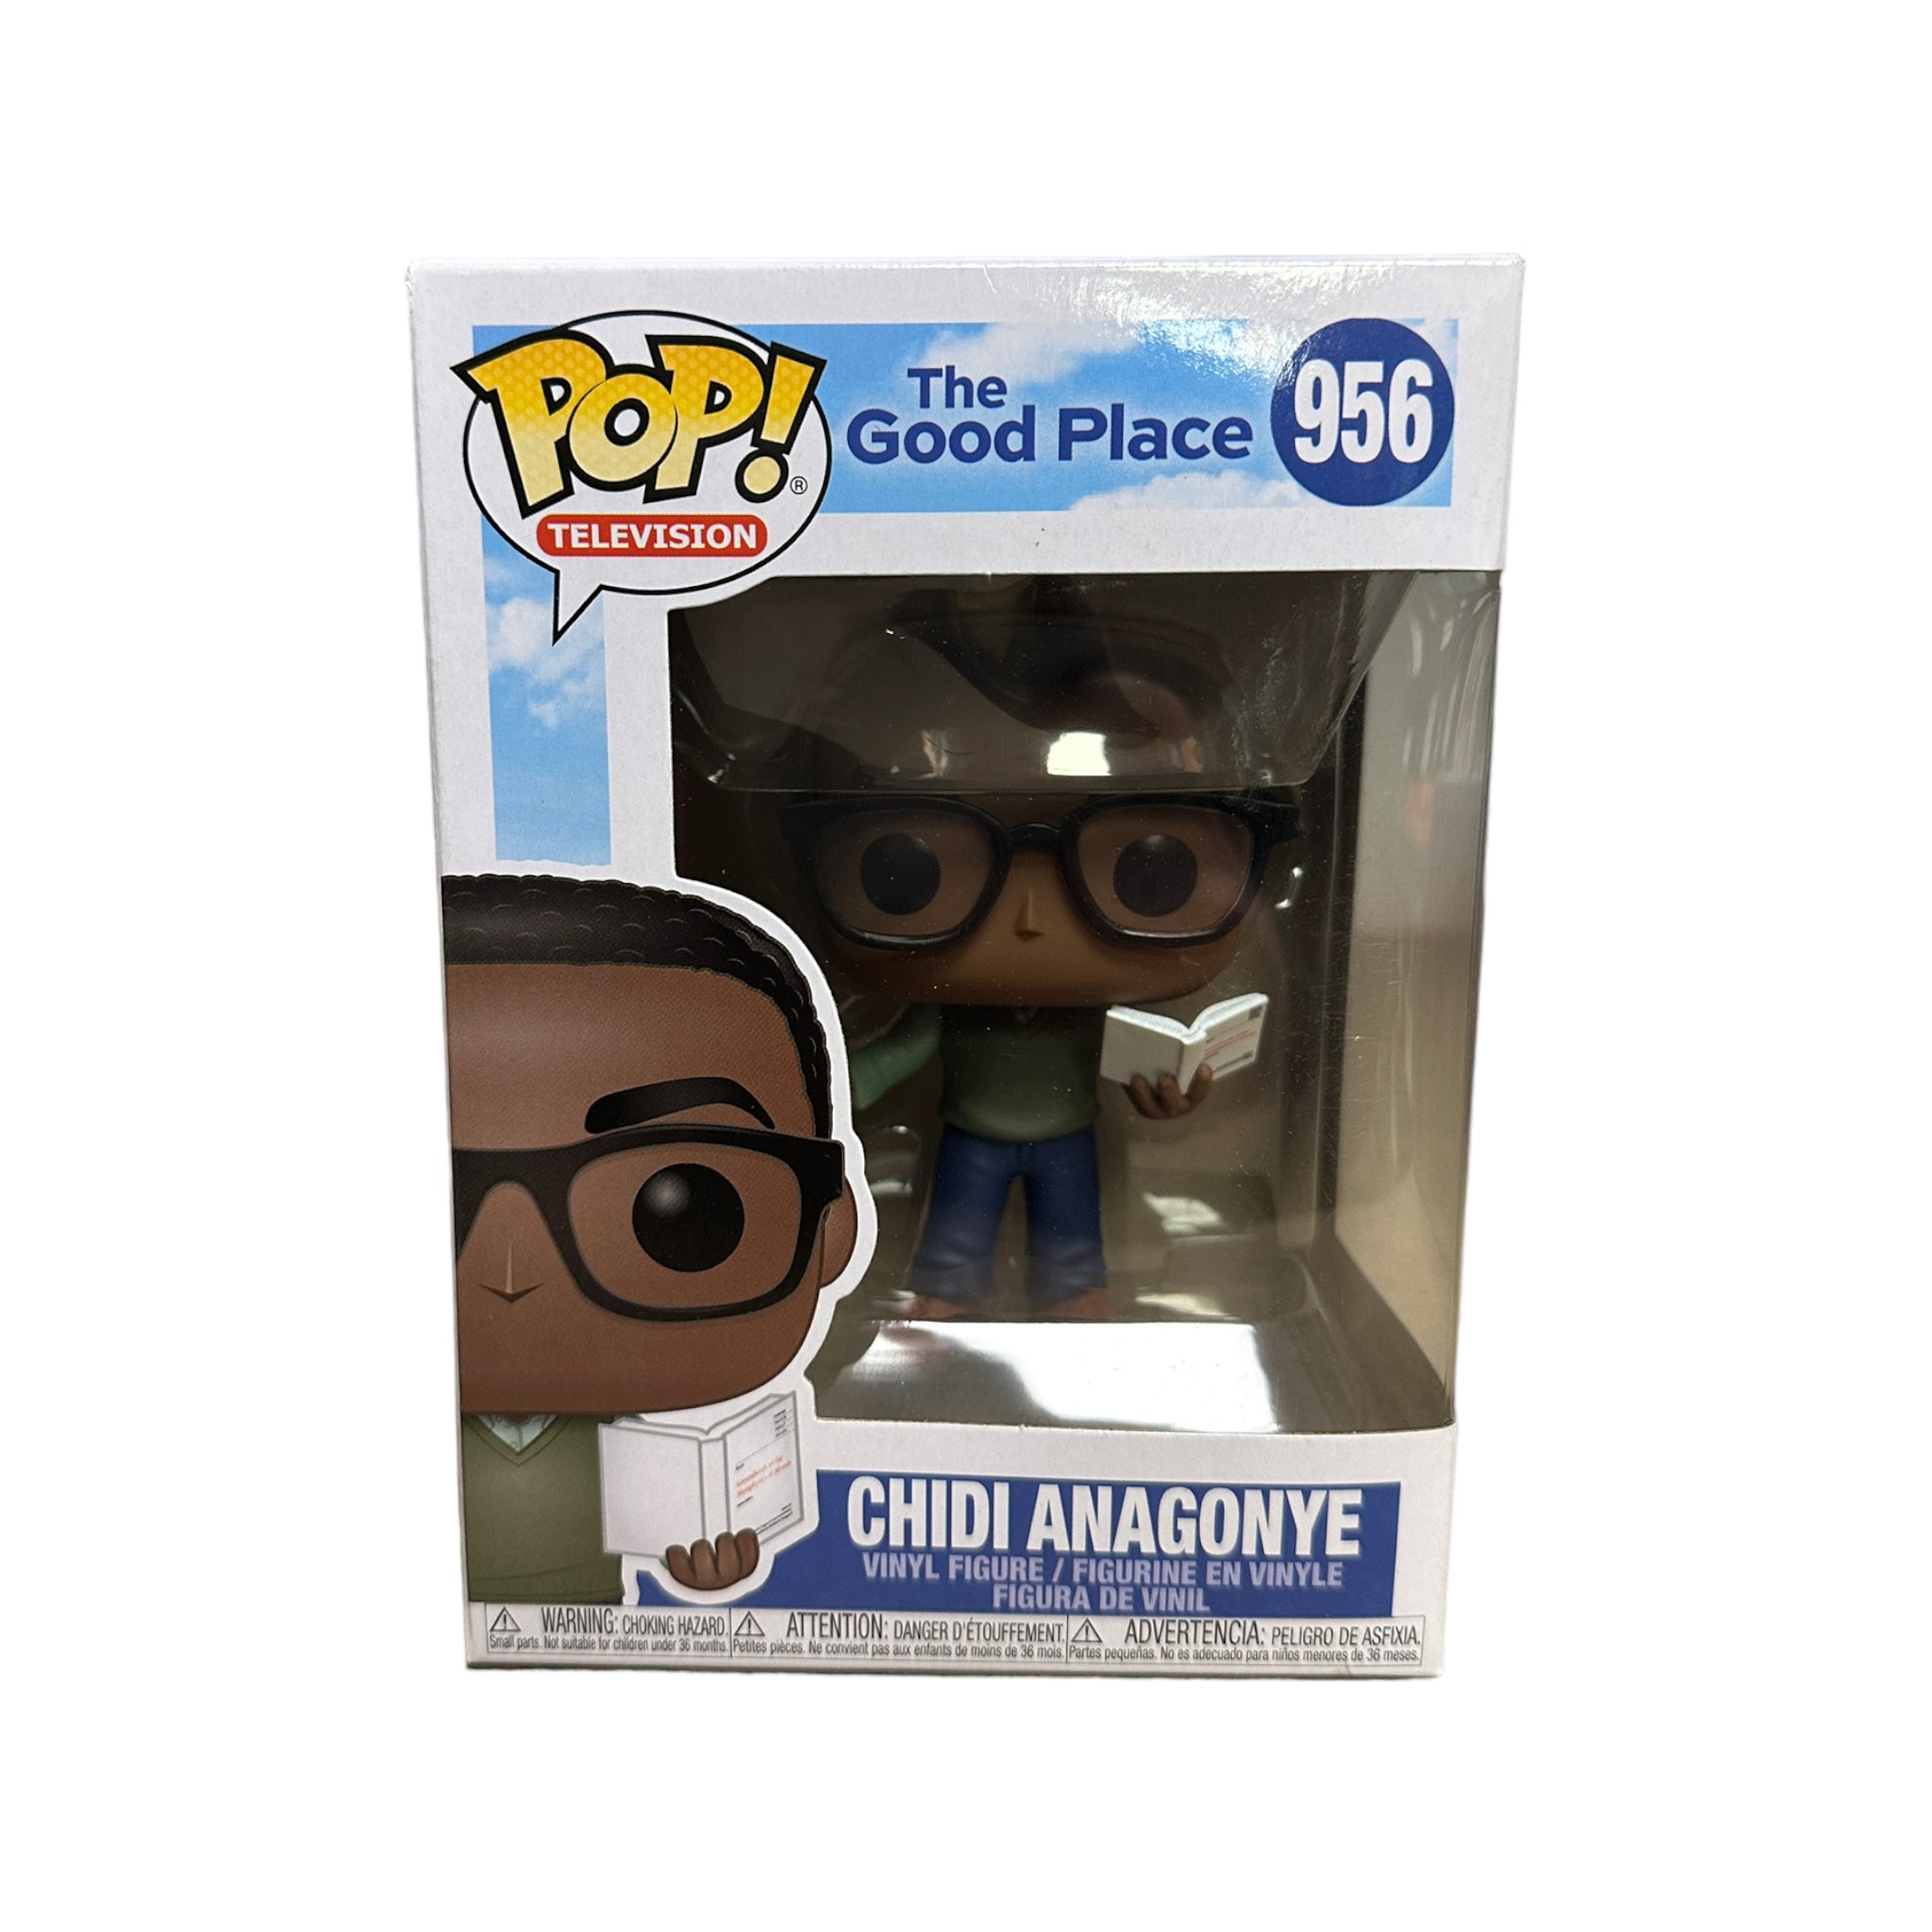 Chidi Anagonye #956 Funko Pop! - The Good Place - 2019 Pop! - Condition 8.75/10